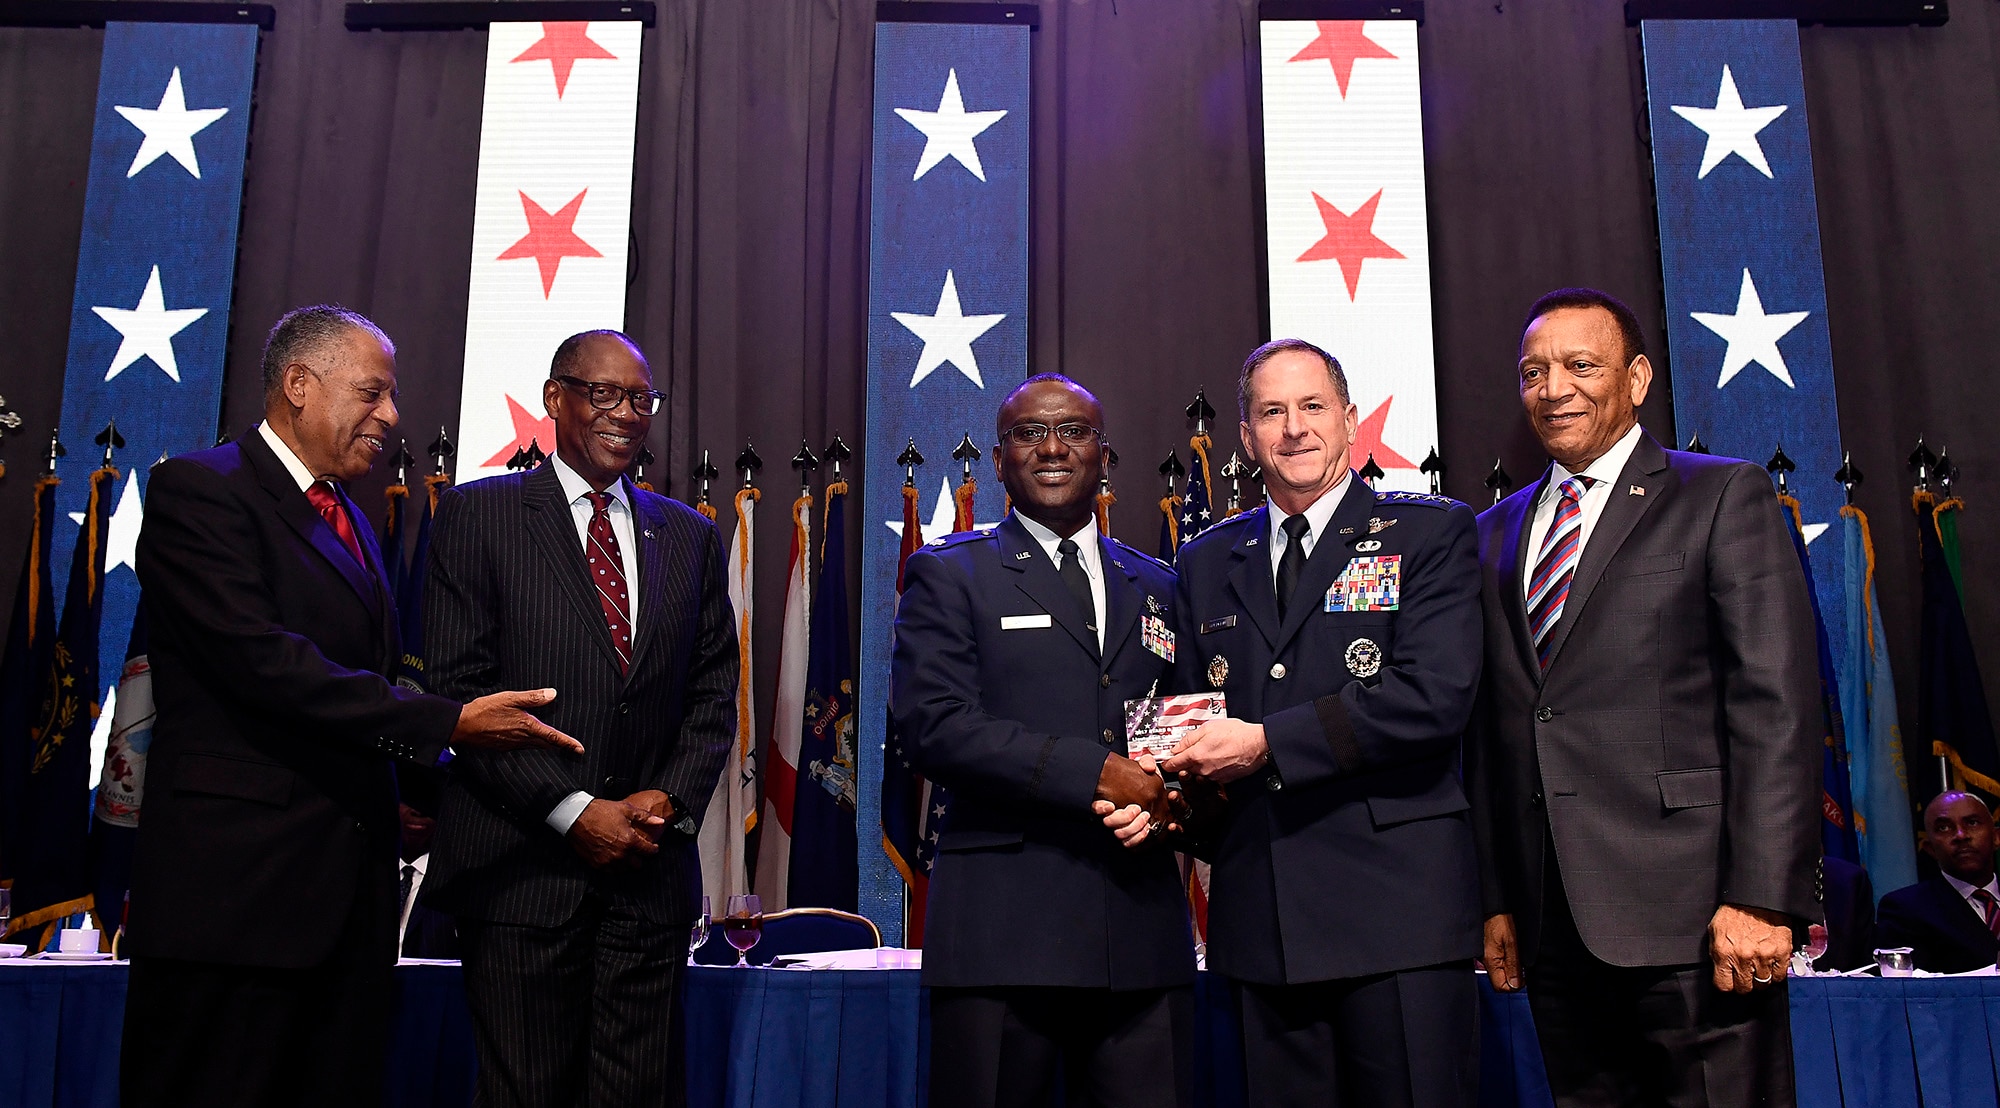 Air Force Chief of Staff Gen. David L. Goldfein, second from right, presents the Air Force Black Engineer of the Year Award to Lt. Col. Eric Amissah during the Black Engineer of the Year Awards Science, Technology, Engineering and Mathematics Conferences' Stars and Stripes ceremony Feb. 10, 2017, in Washington, D.C. (U.S. Air Force photo/Scott M. Ash)